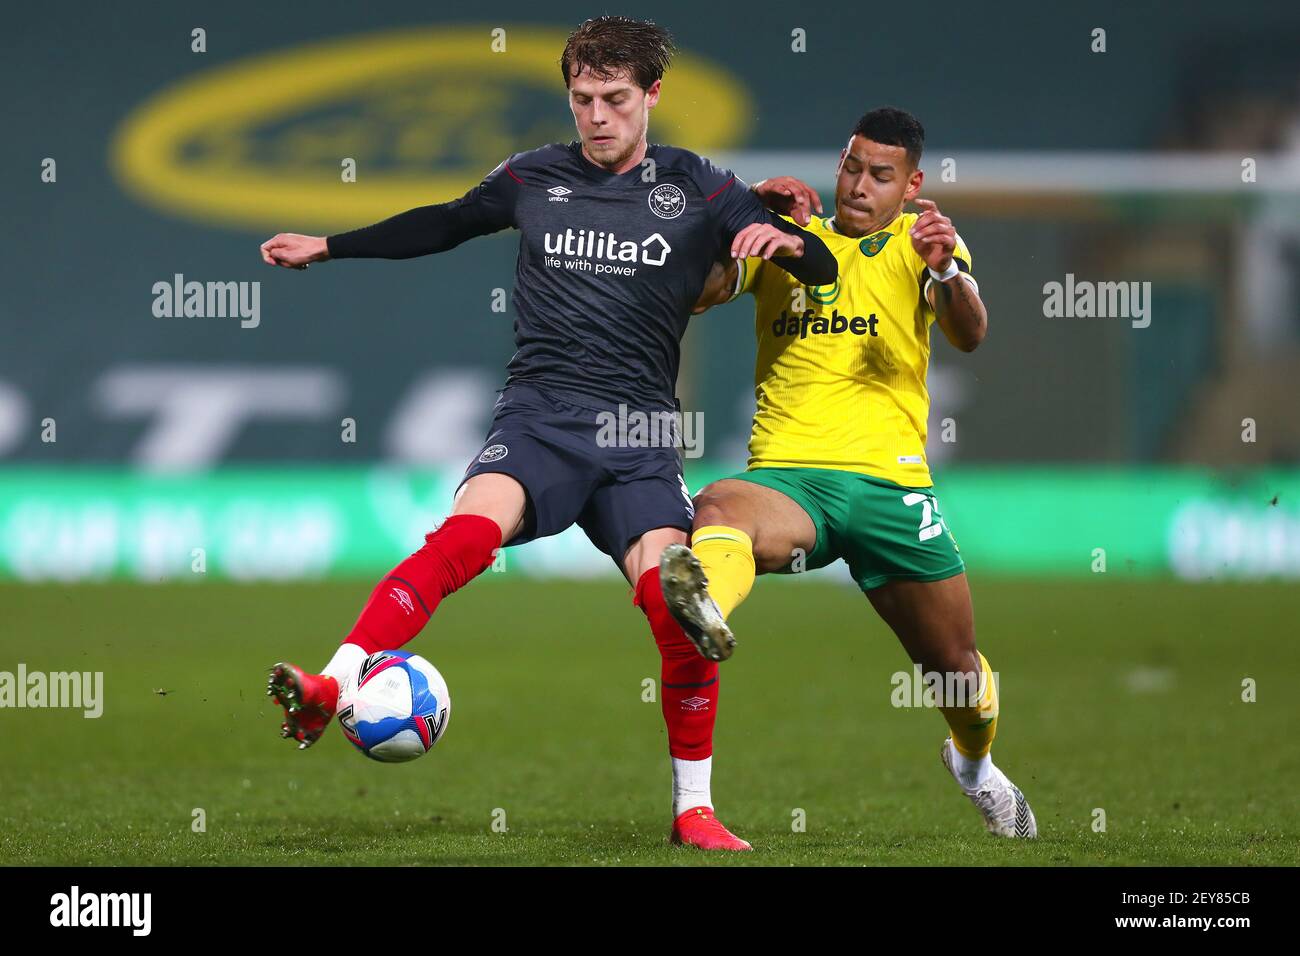 Mathias Jensen of Brentford and Onel Hernandez of Norwich City - Norwich City v Brentford, Sky Bet Championship, Carrow Road, Norwich, UK - 3rd March 2021  Editorial Use Only - DataCo restrictions apply Stock Photo